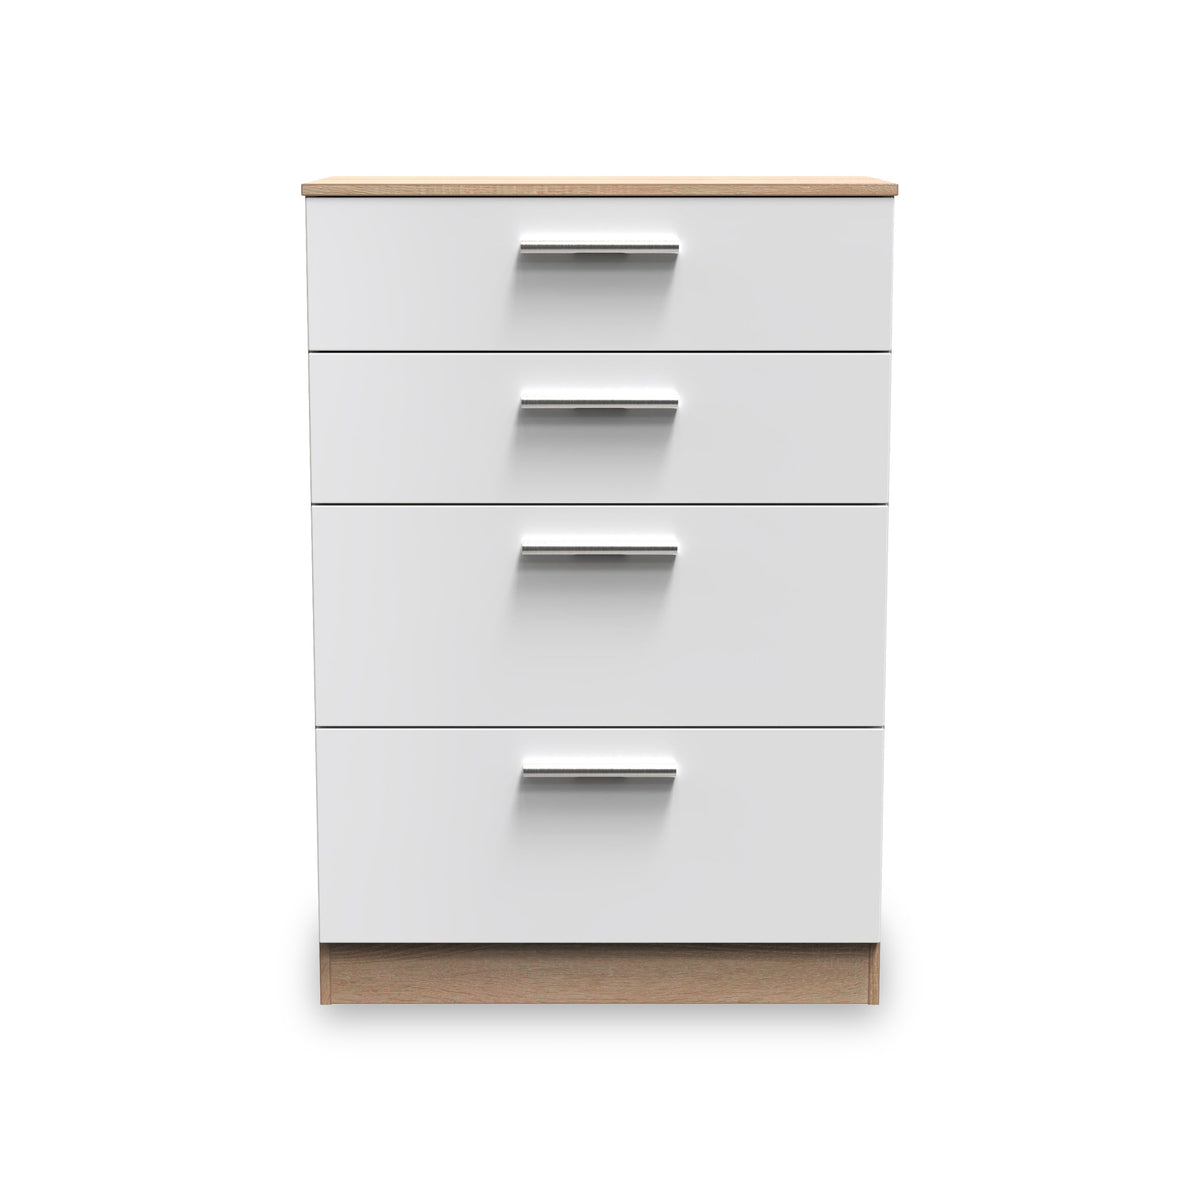 Blakely White and Light Oak 4 Drawer Deep Chest from Roseland Furniture